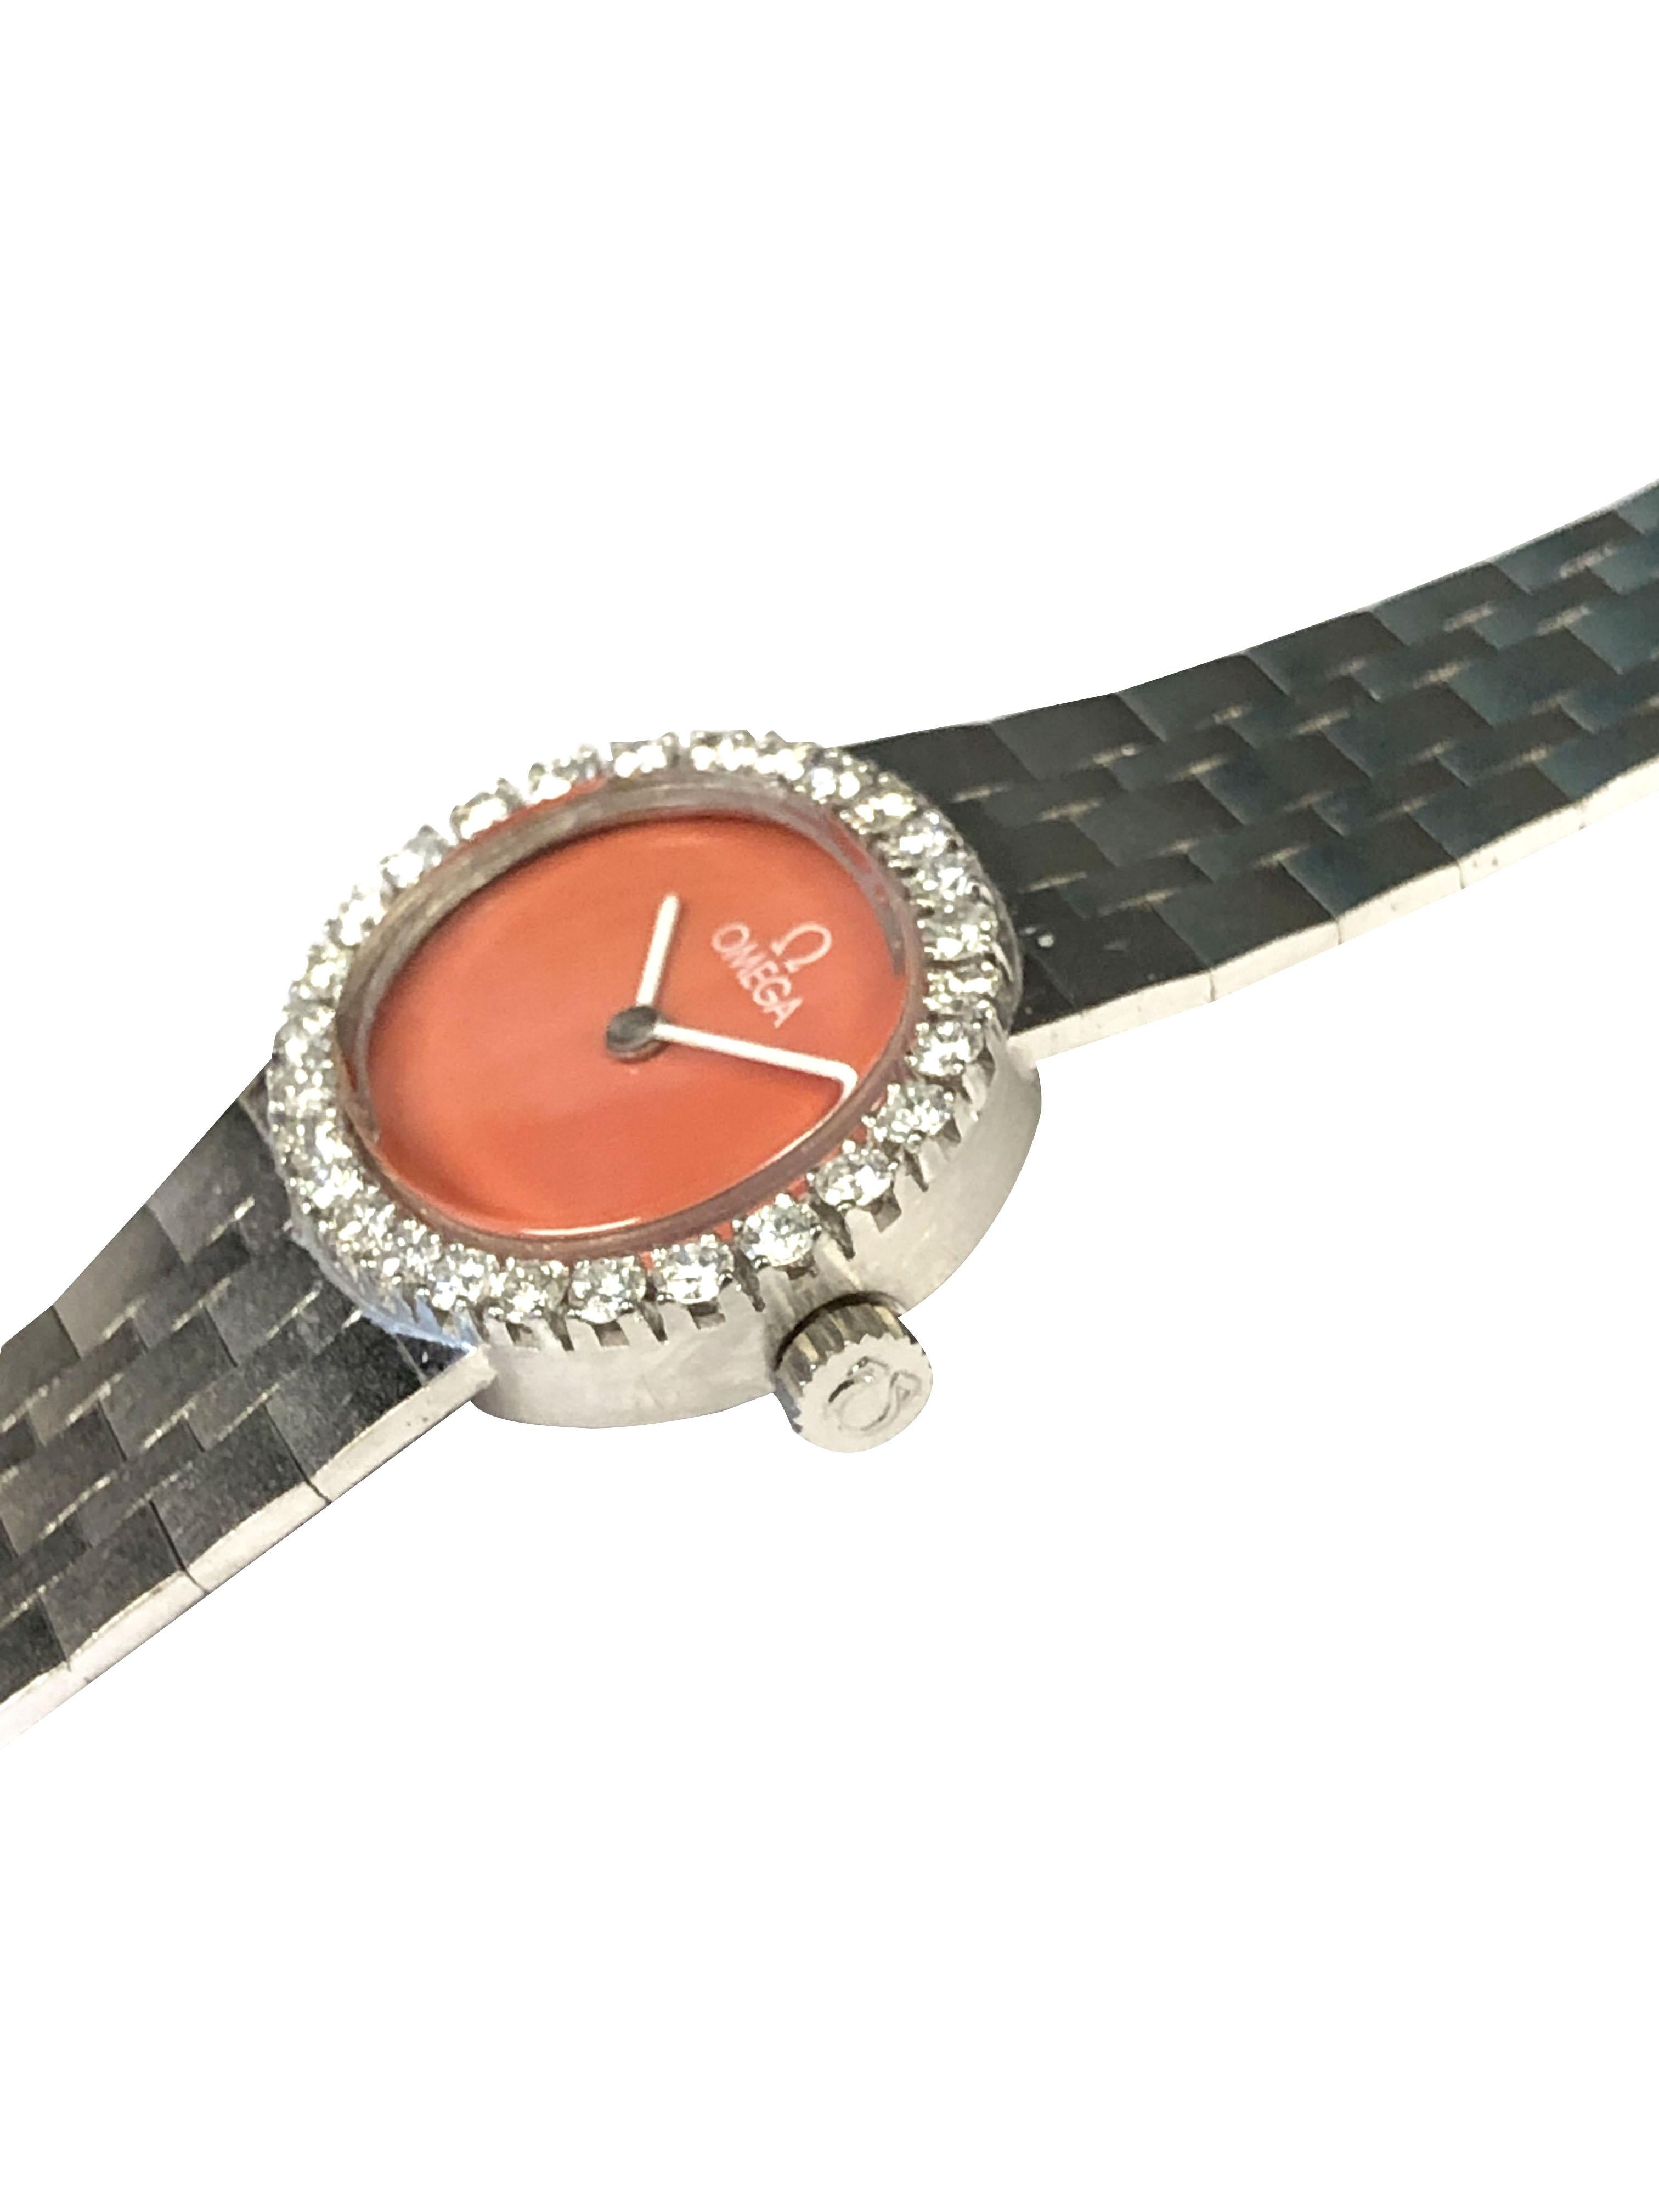 Circa 1980 Omega Ladies Wrist Watch, 23 X 20 M.M. 18K White Gold 2 Piece case, Round Brilliant cut Diamond bezel totaling 1 Carat. 17 Jewel Mechanical, manual wind movement, Coral dial. 5/8 inch wide tapering 18K White Gold Brick link bracelet with